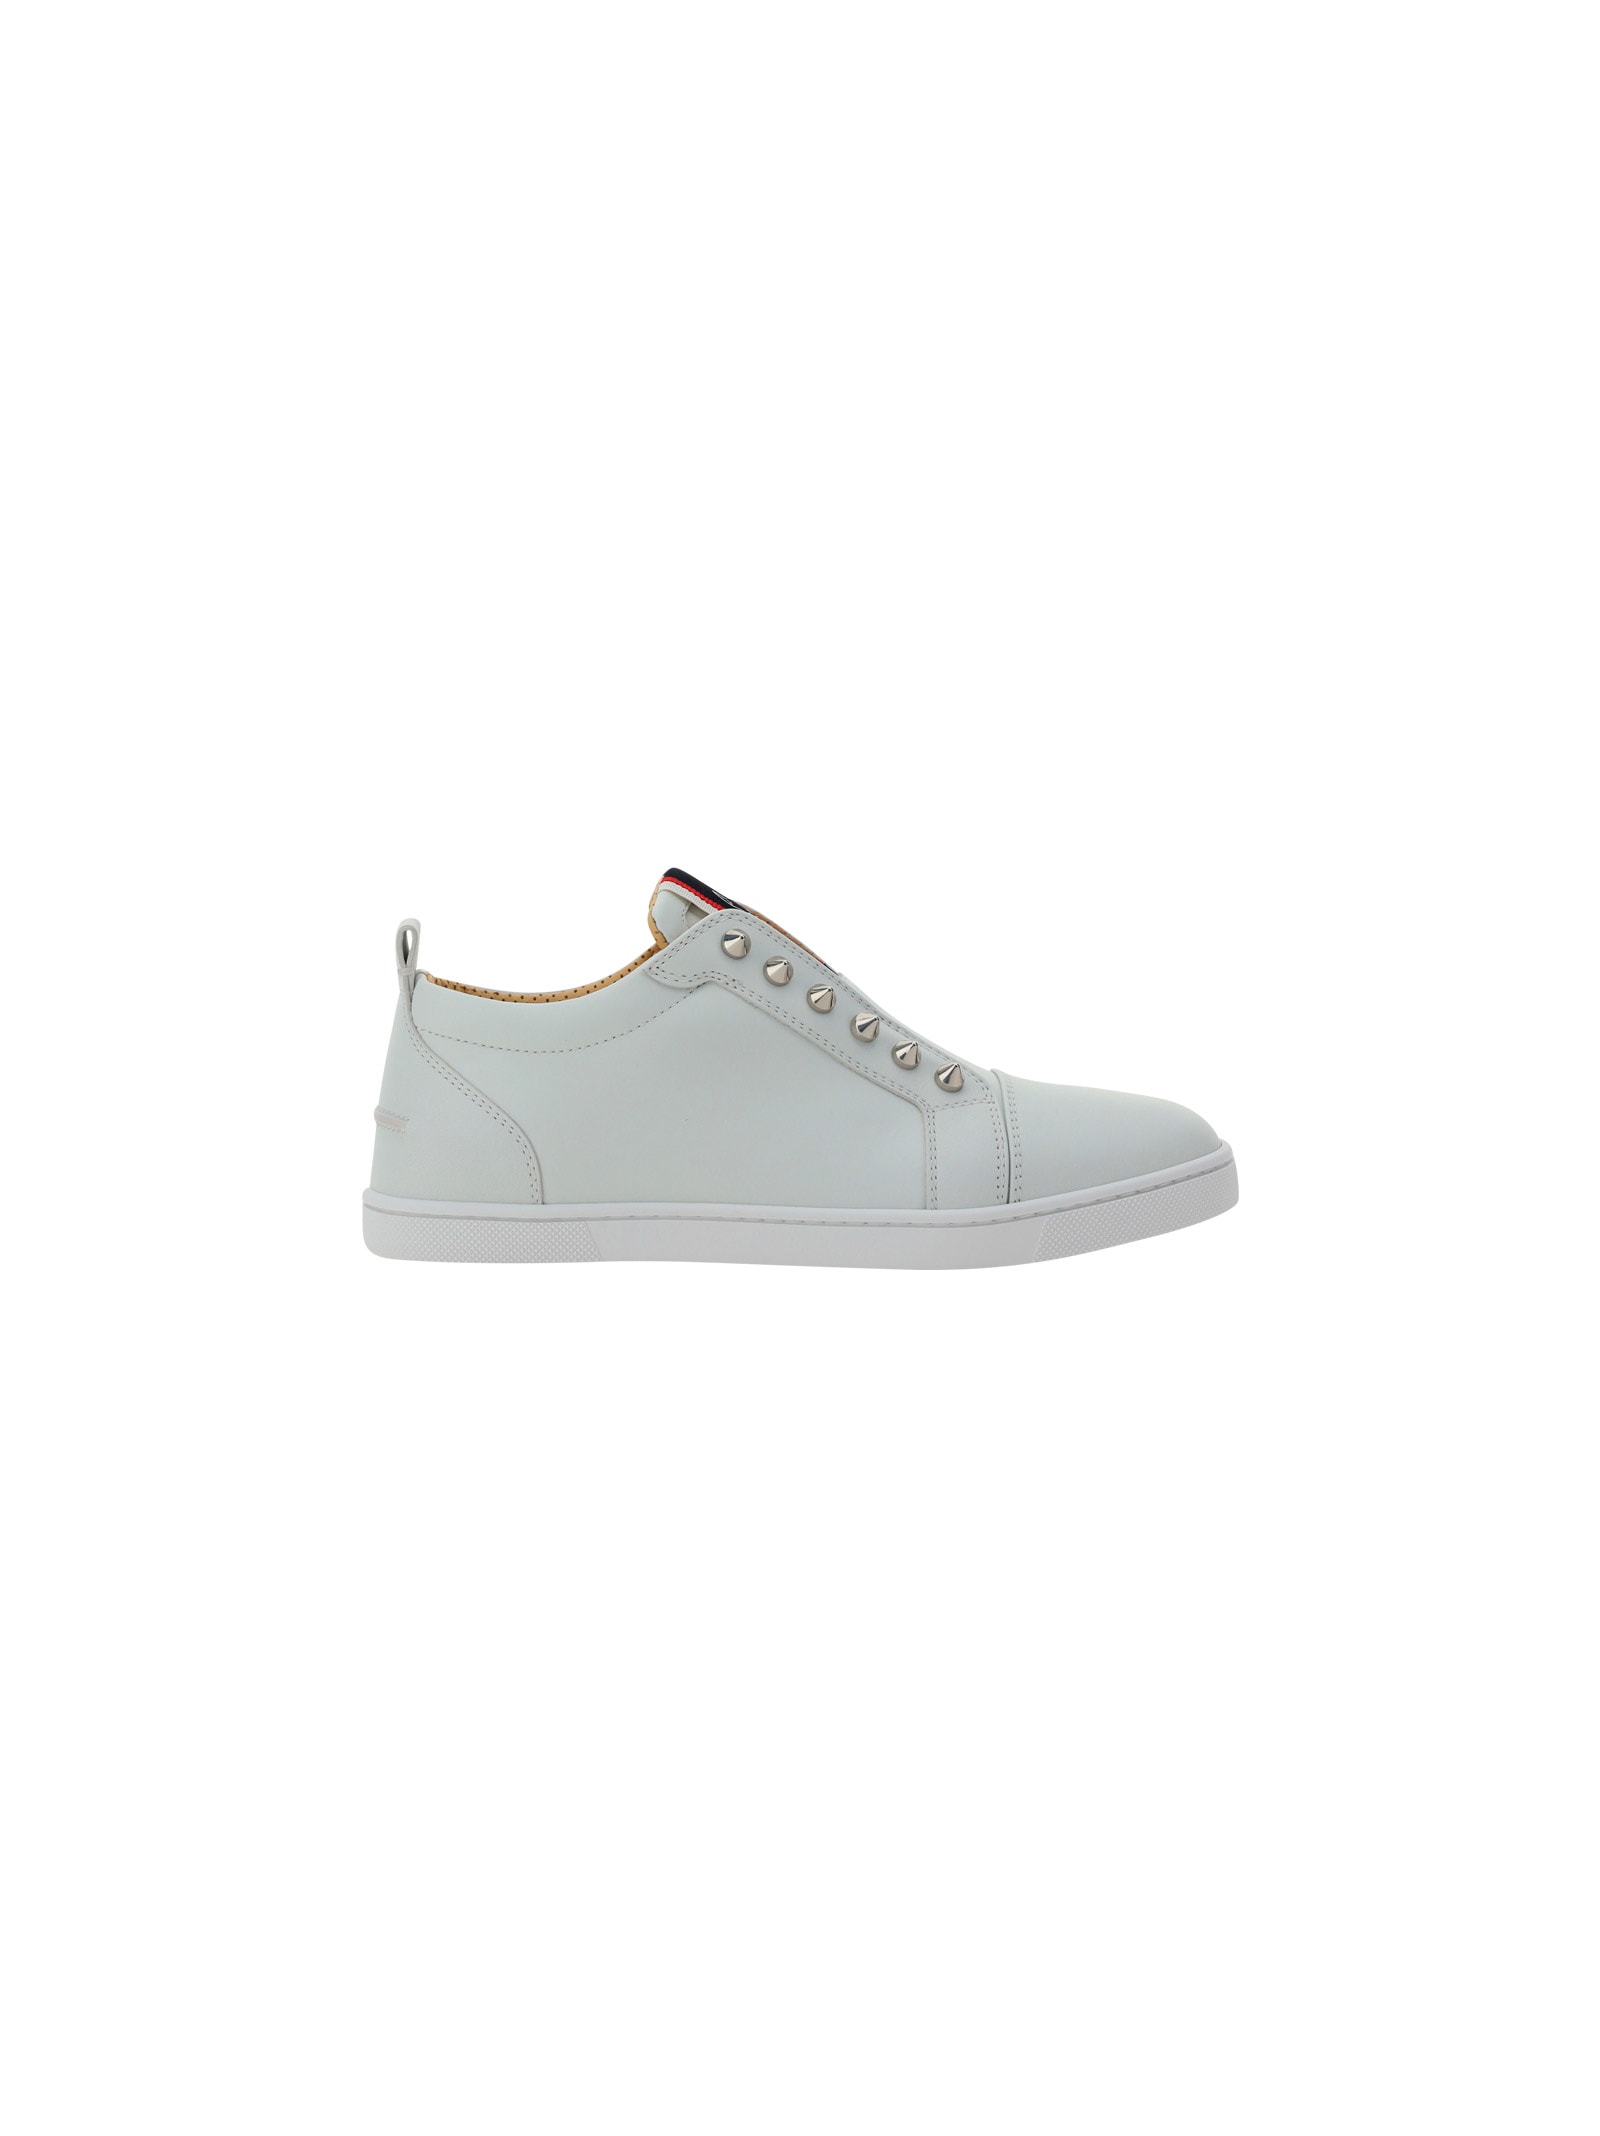 CHRISTIAN LOUBOUTIN FIQUE A VONTADE SNEAKERS